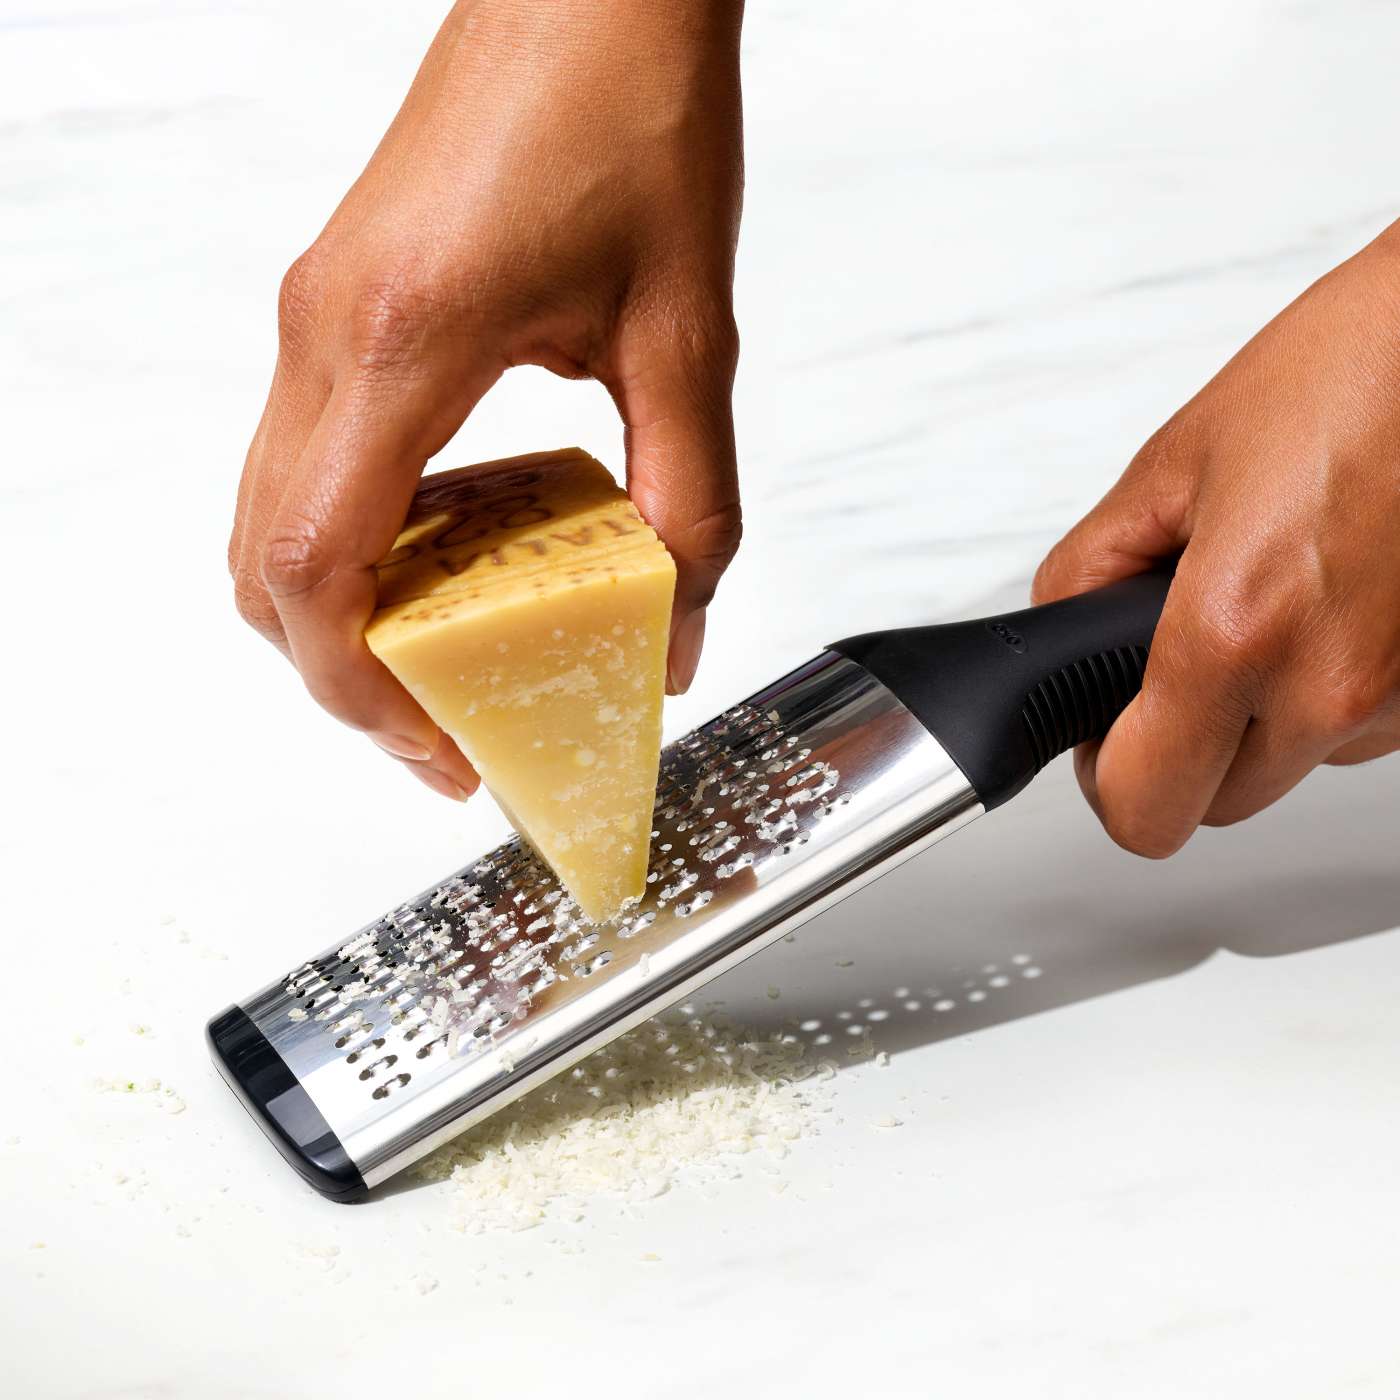 OXO Good Grips Pro Grater (Formerly I-Series Hand-Held Grater